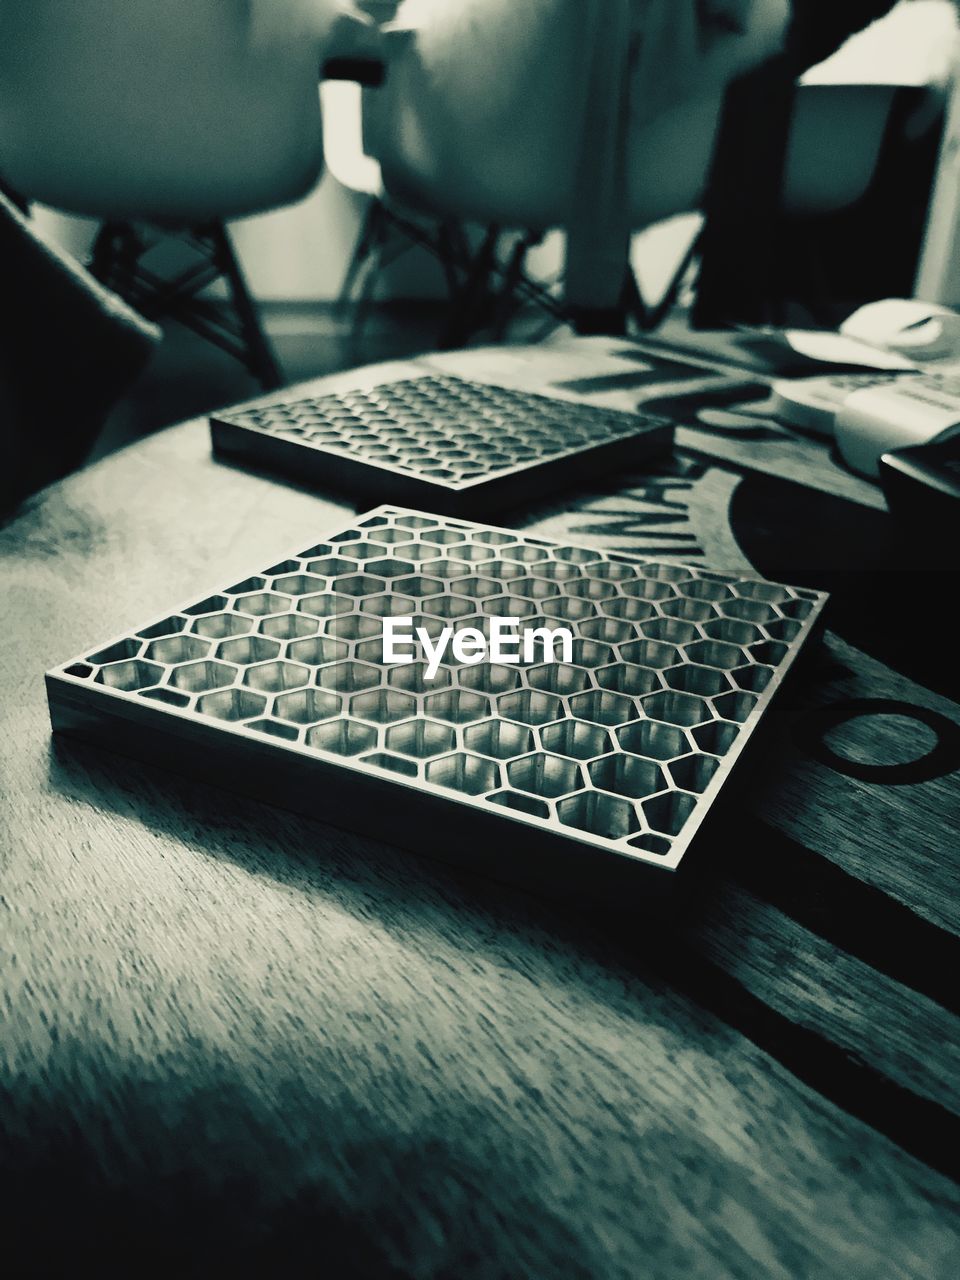 CLOSE-UP OF LAPTOP KEYBOARD ON TABLE